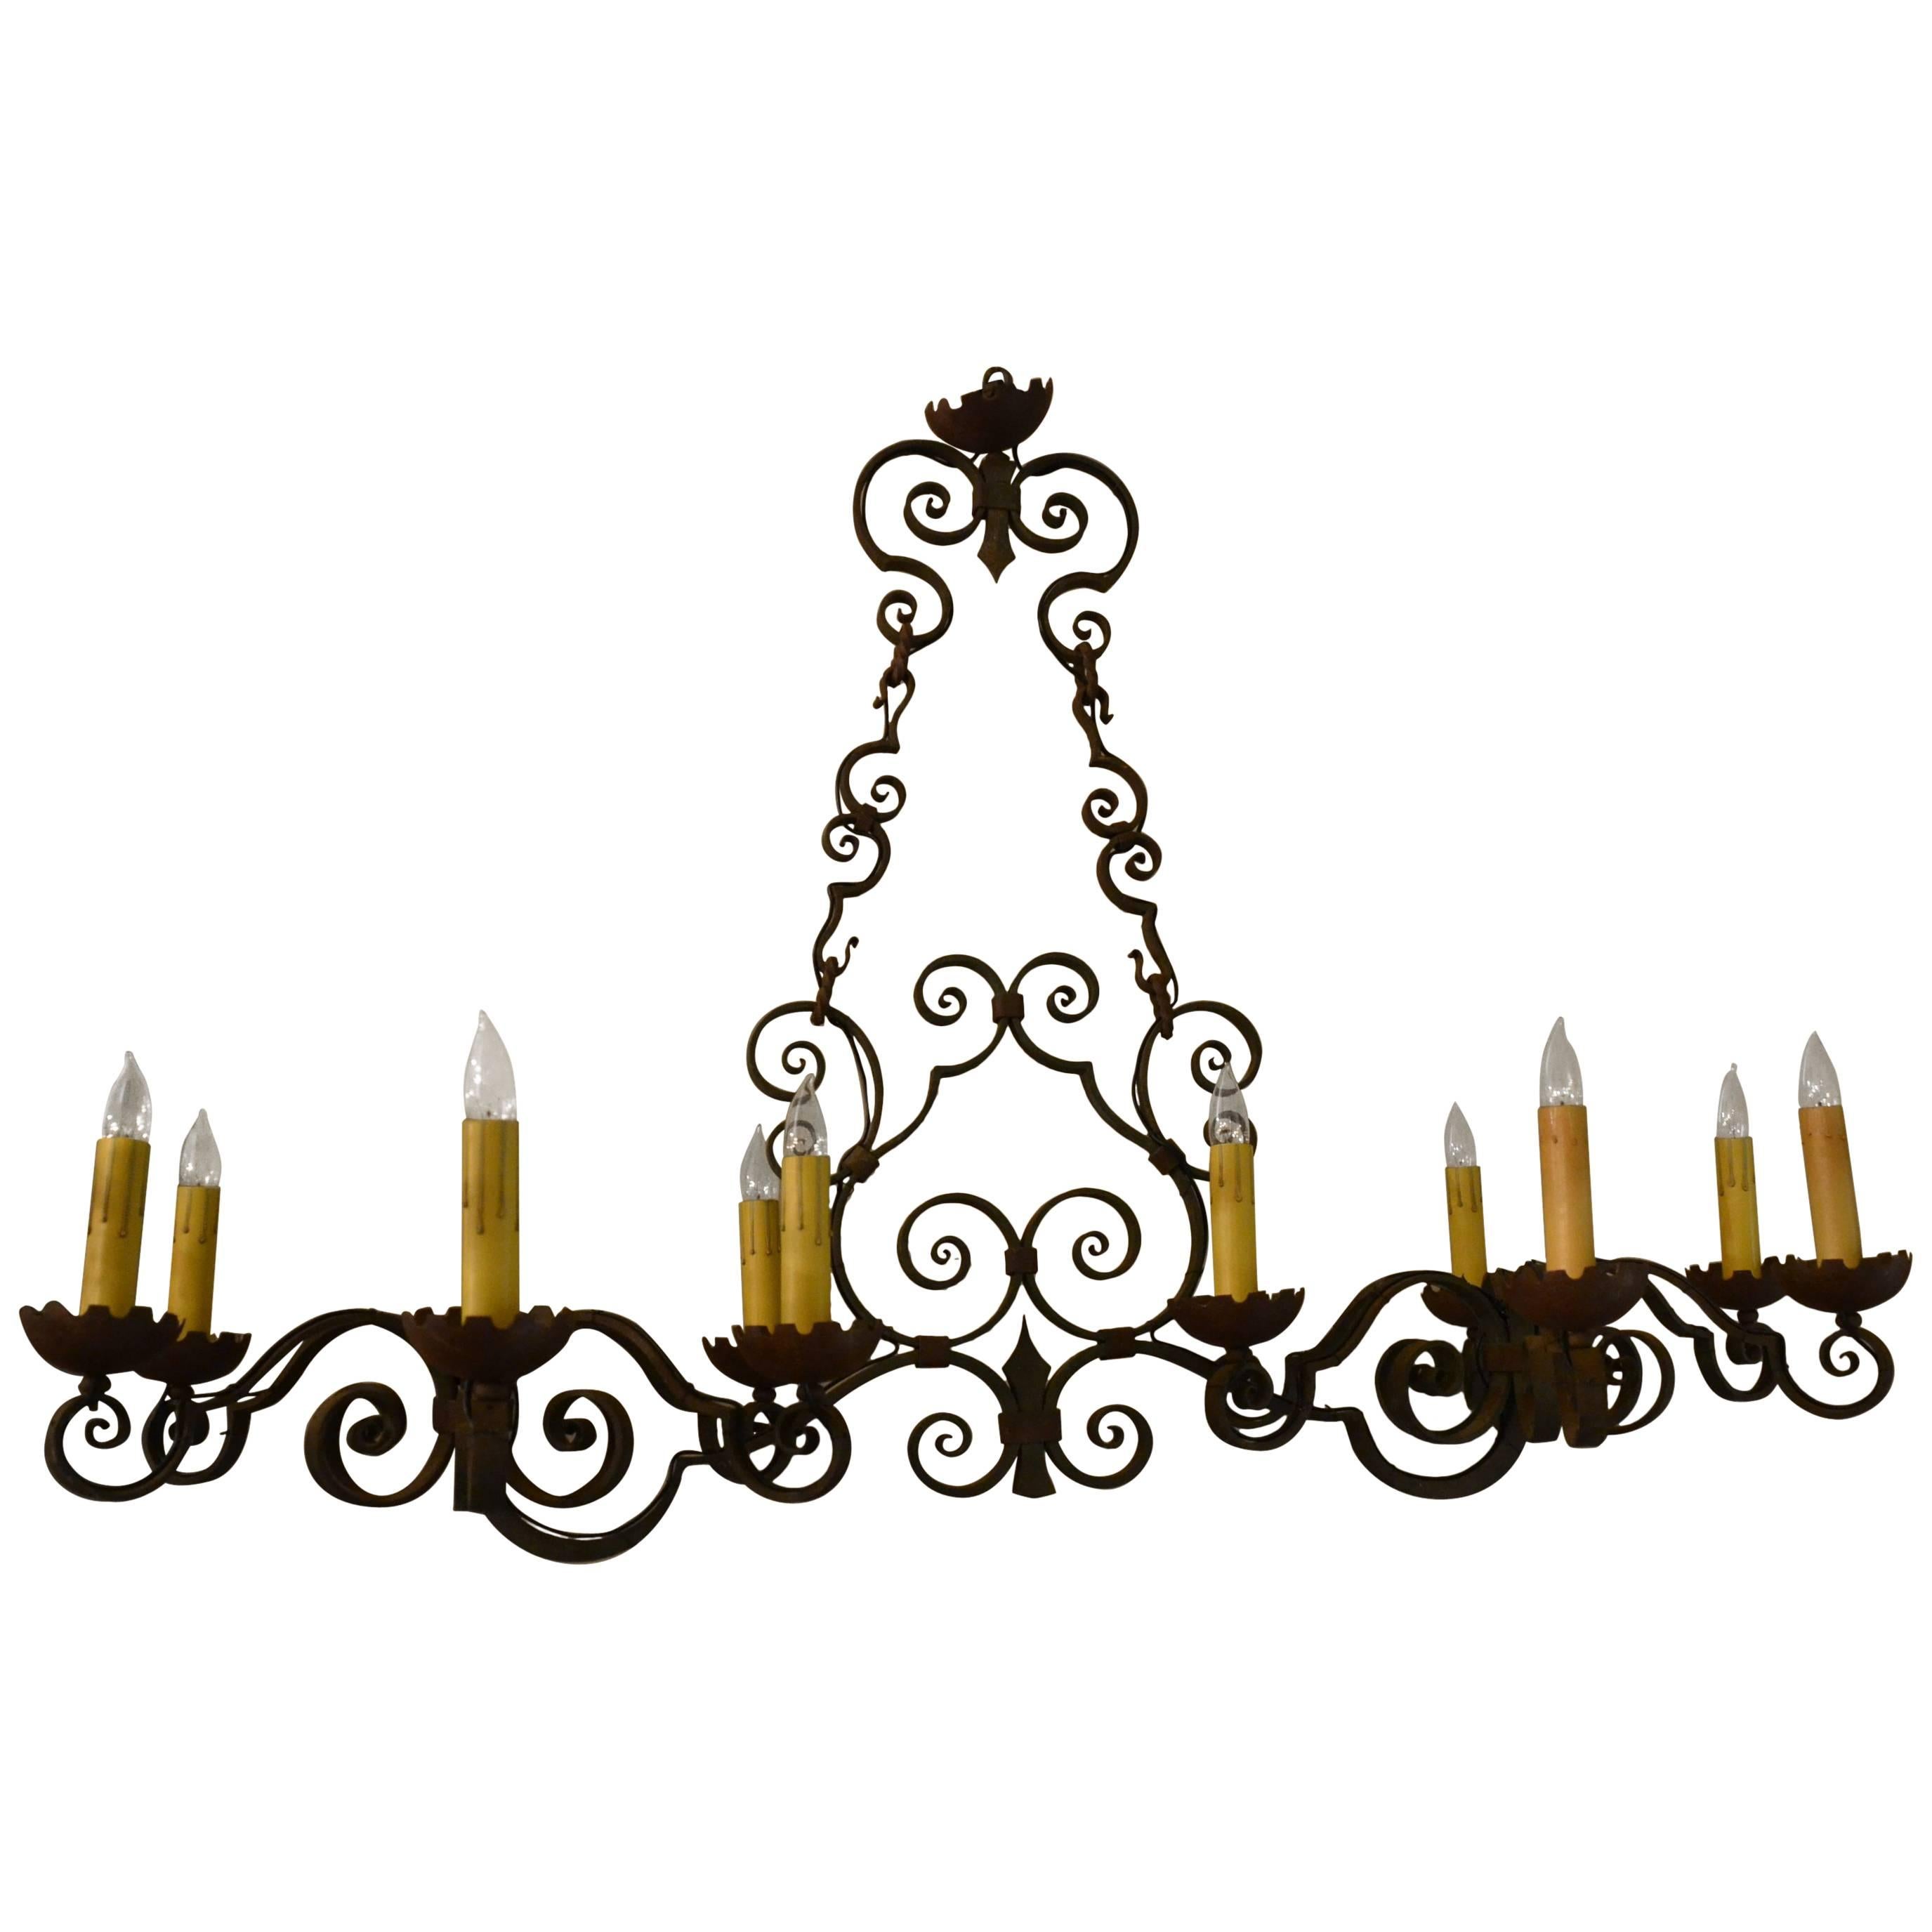 Antique French Provincial Twelve-Light Wrought Iron Chandelier